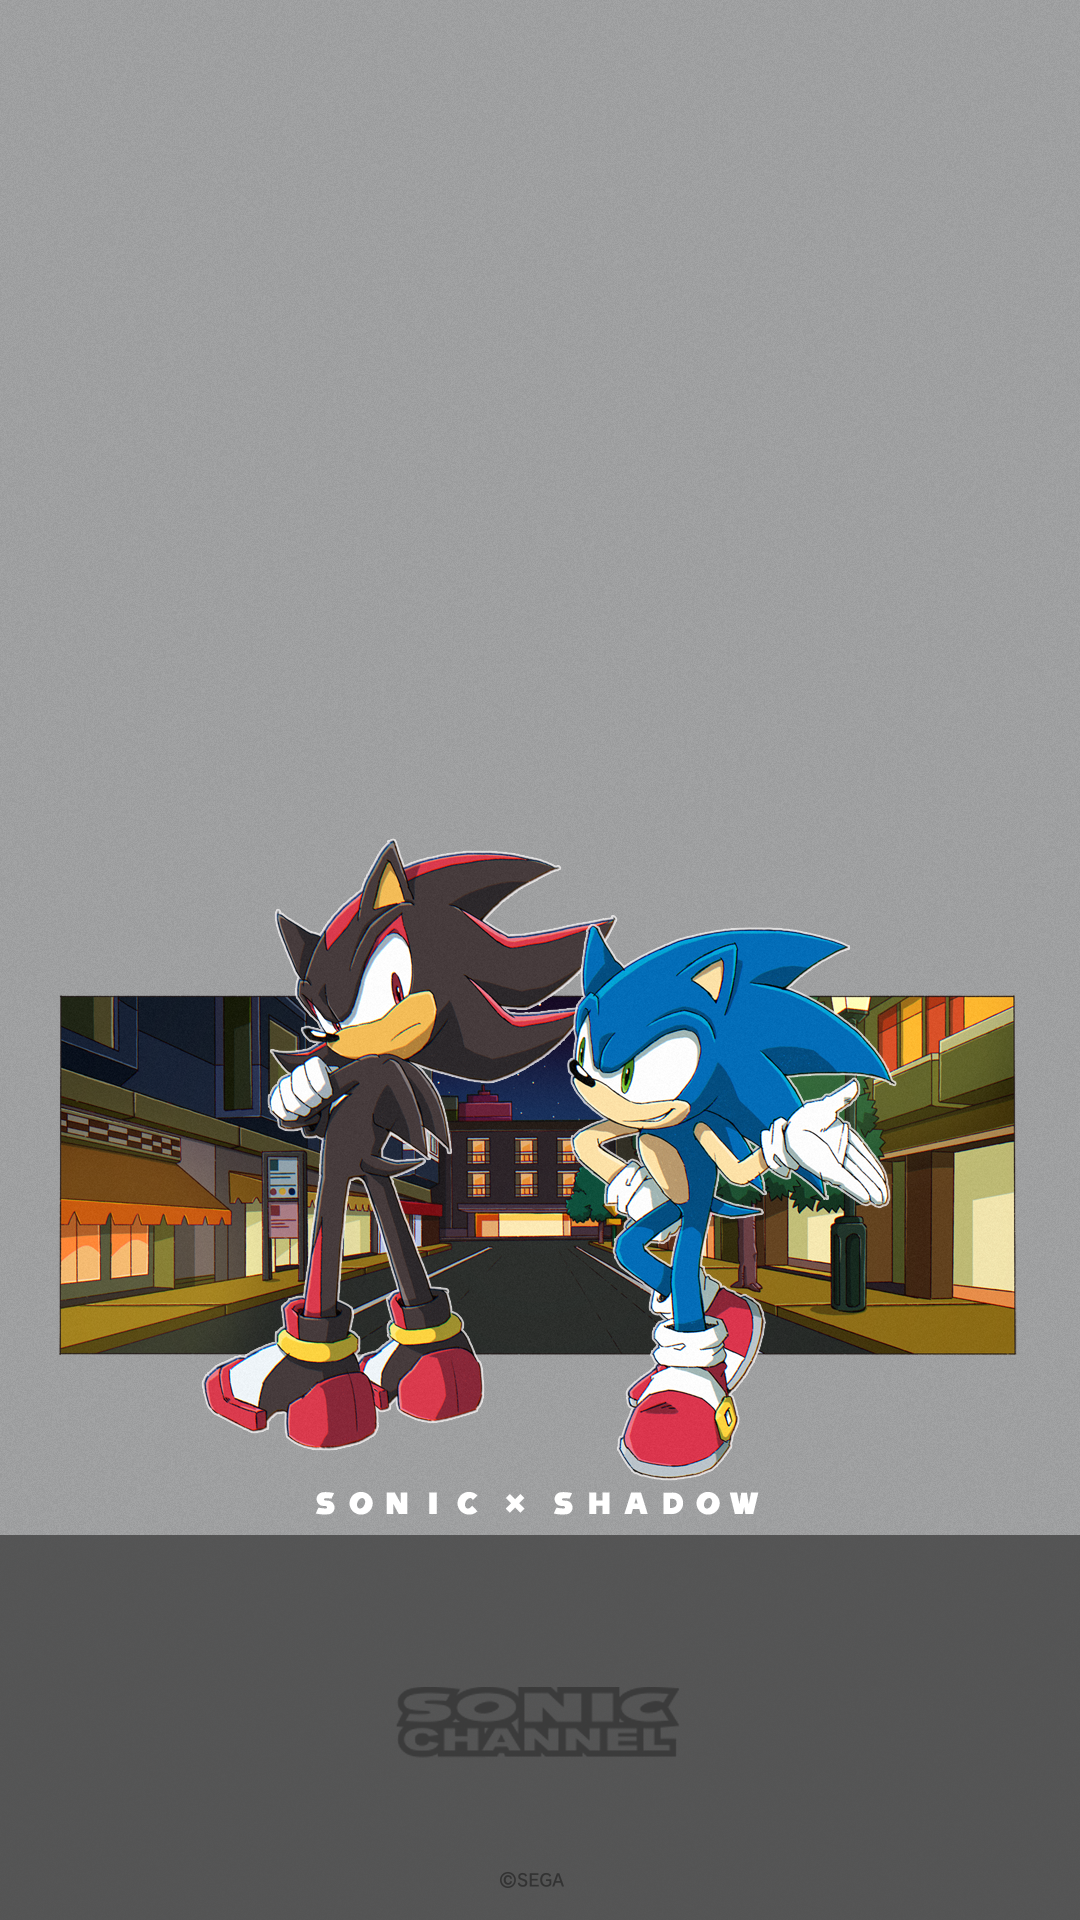 Chaos in the Shadows [Sonic Channel 2021 July Story - Sonic X Shadow] 